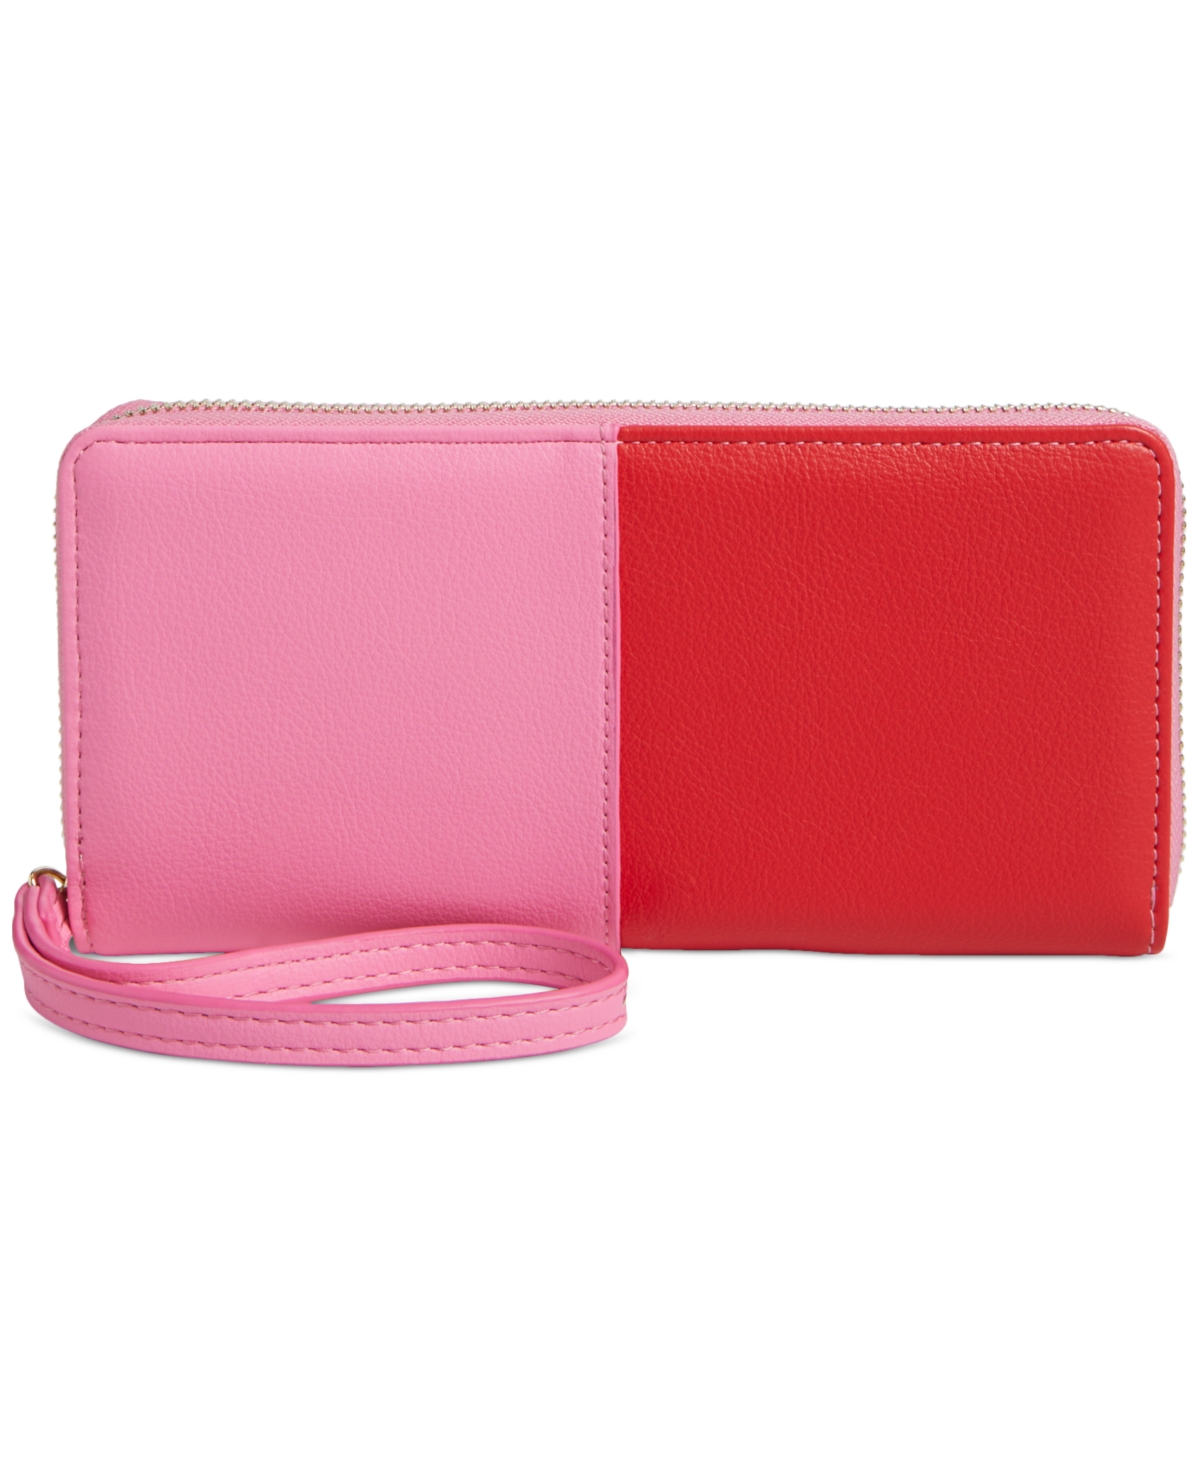 Angii Colorblocked Zip-Around Wallet, Created for Macy's - Pink/red